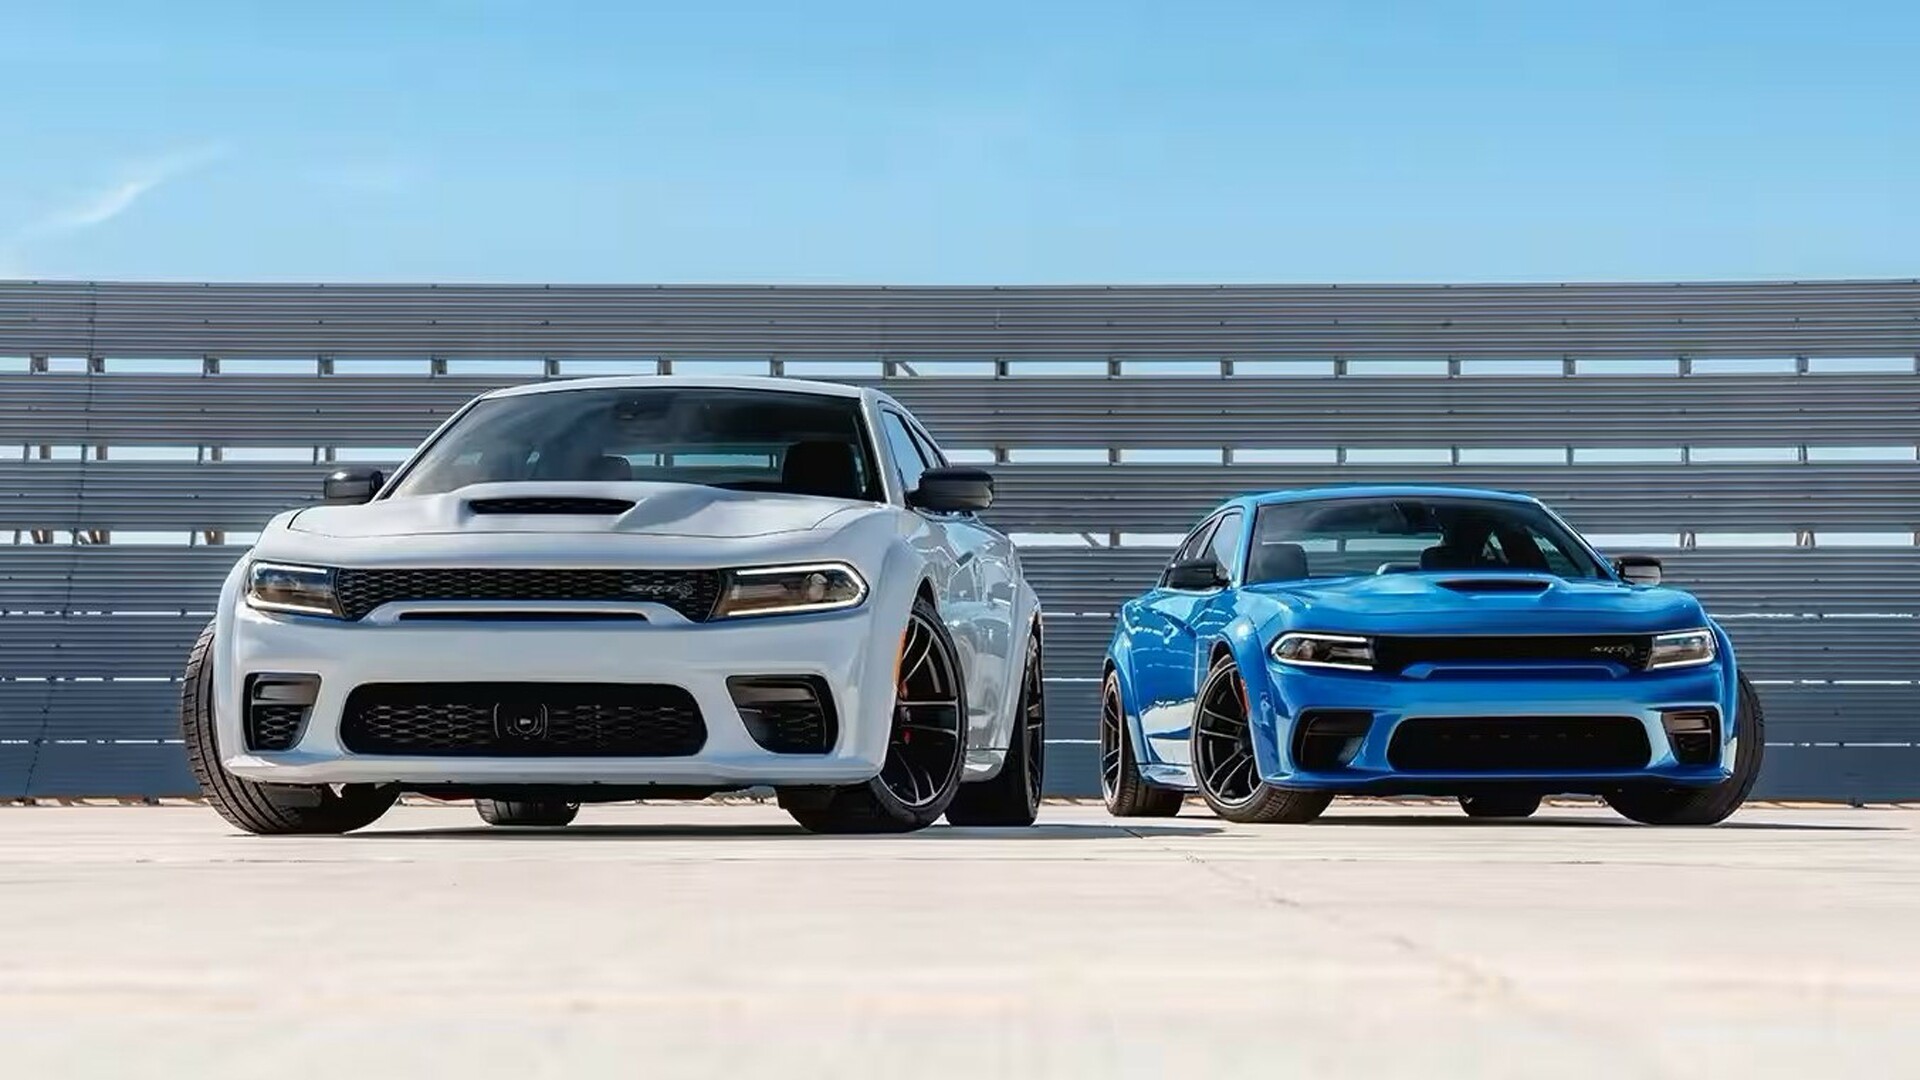 A Couple Of 2020 Dodge Chargers (Credits: Dodge)